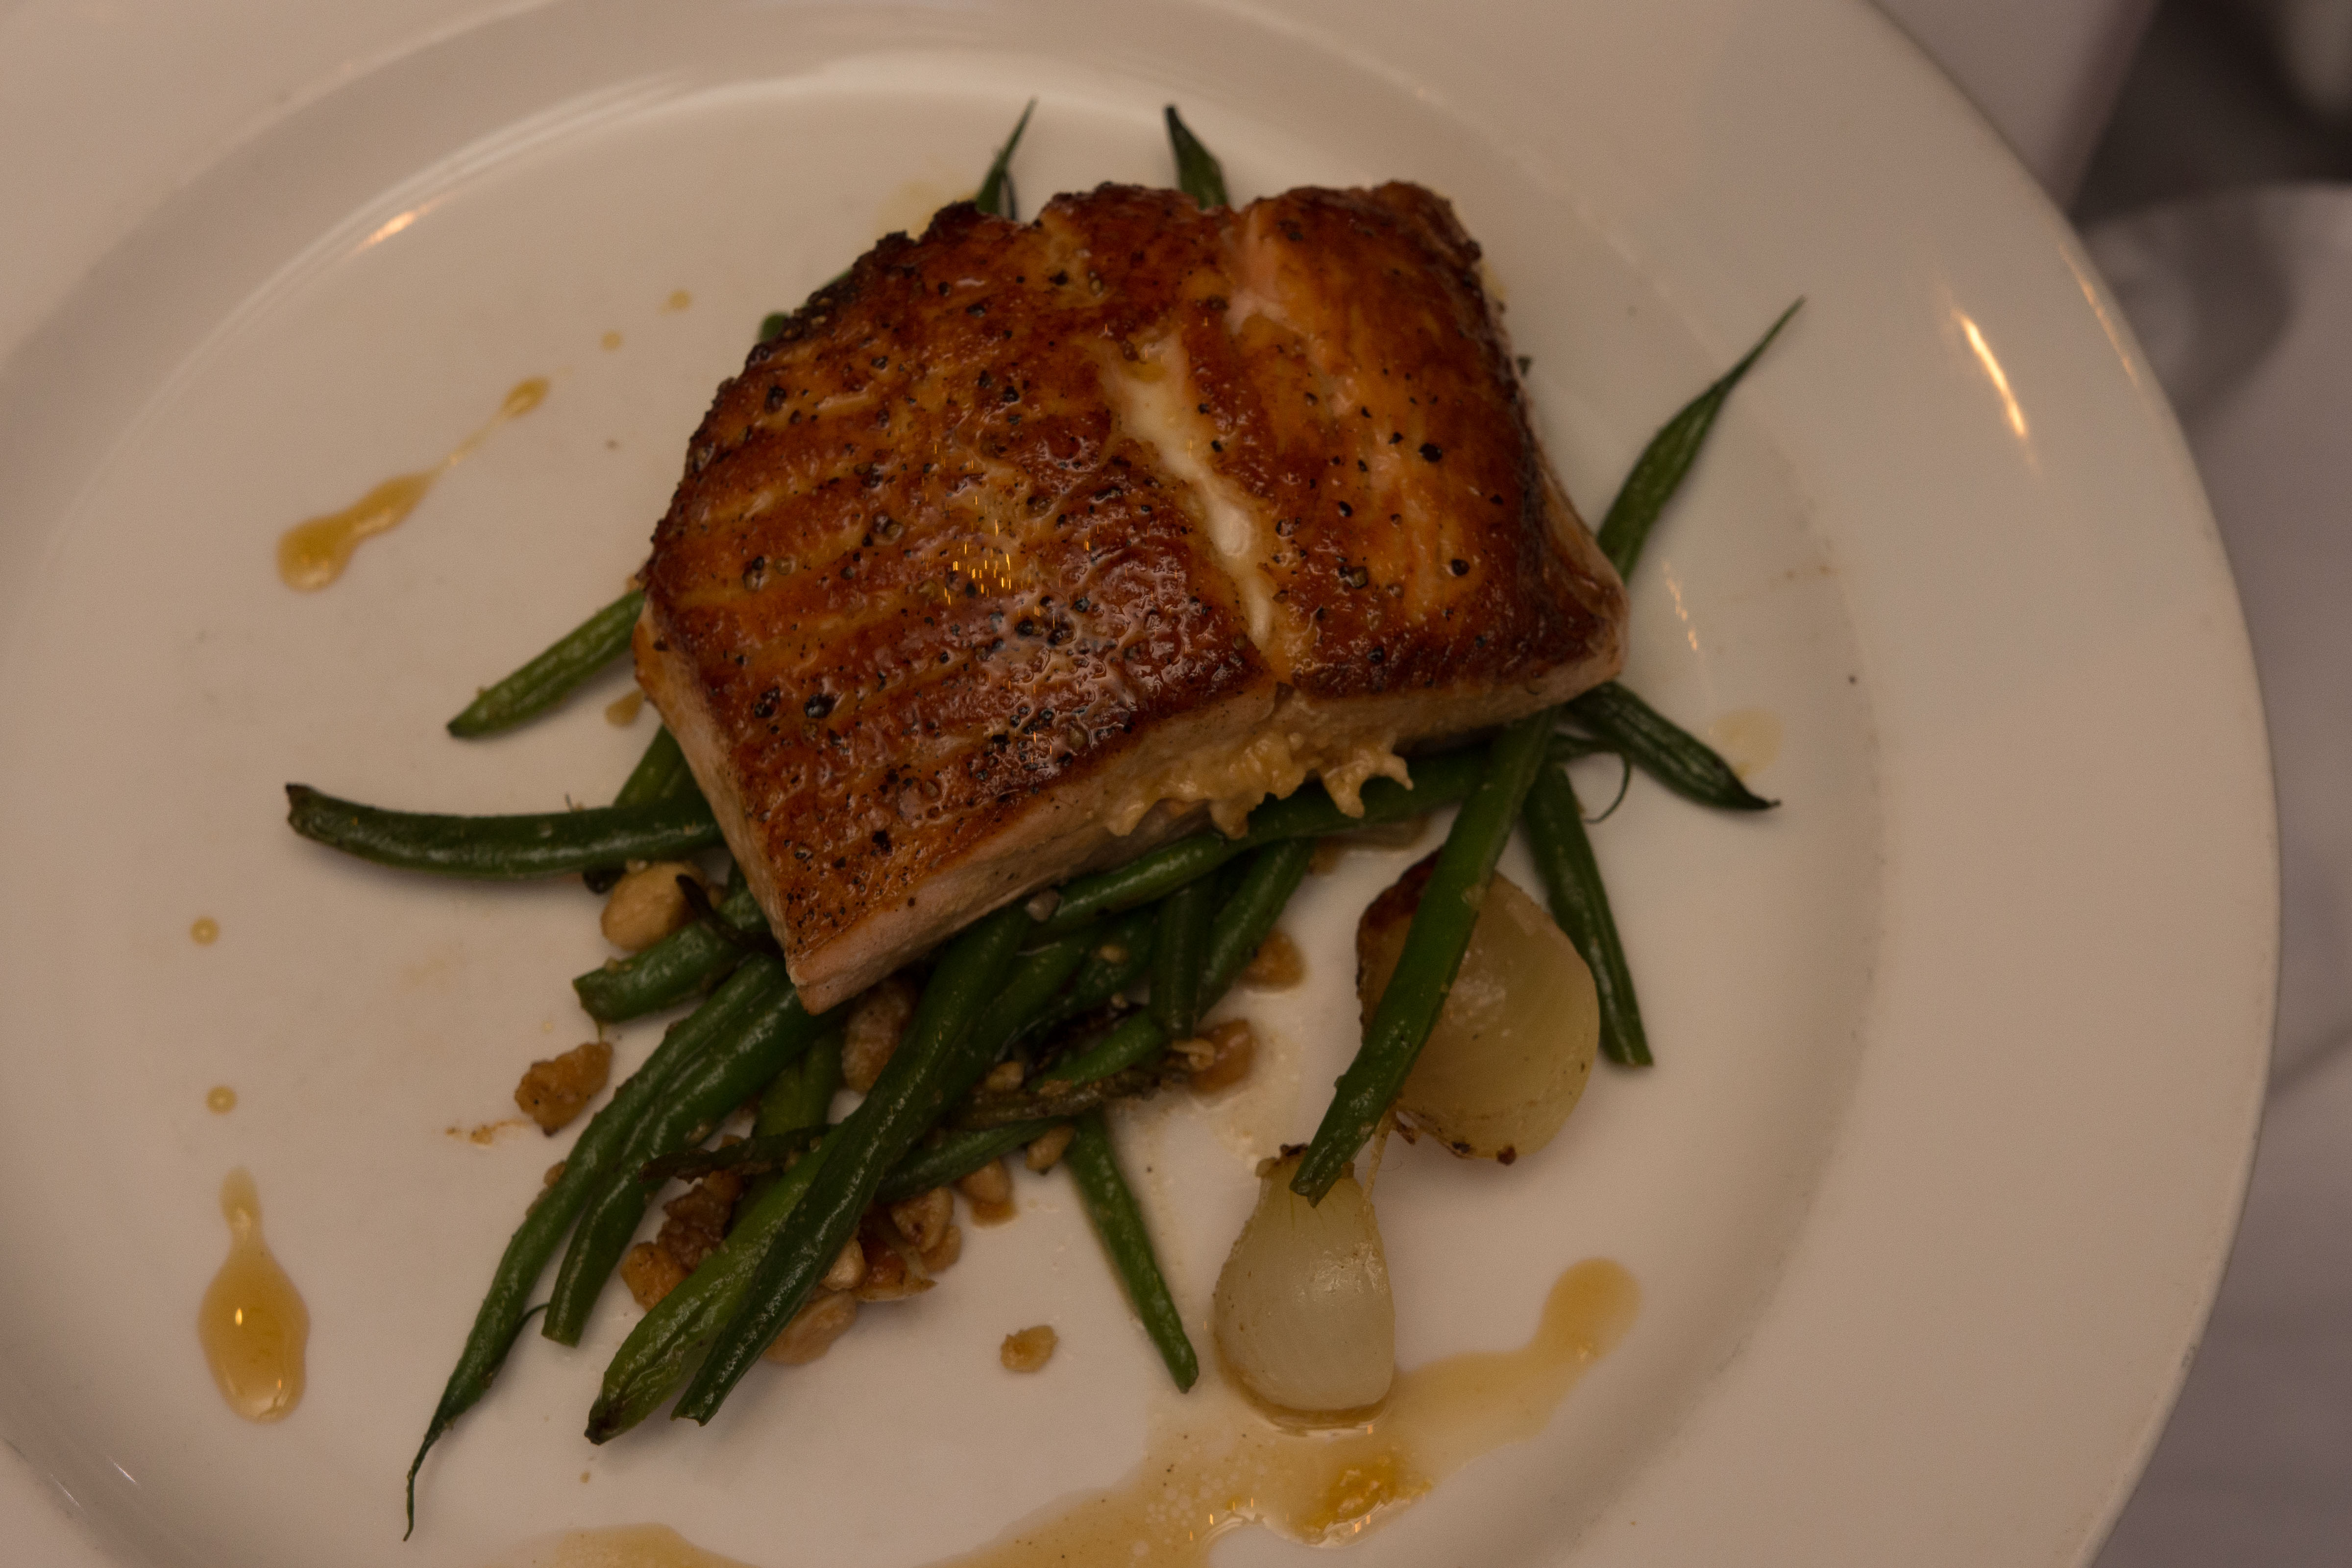 Seared Citrus Glazed Salmon with Marcona Almonds and Brown Butter